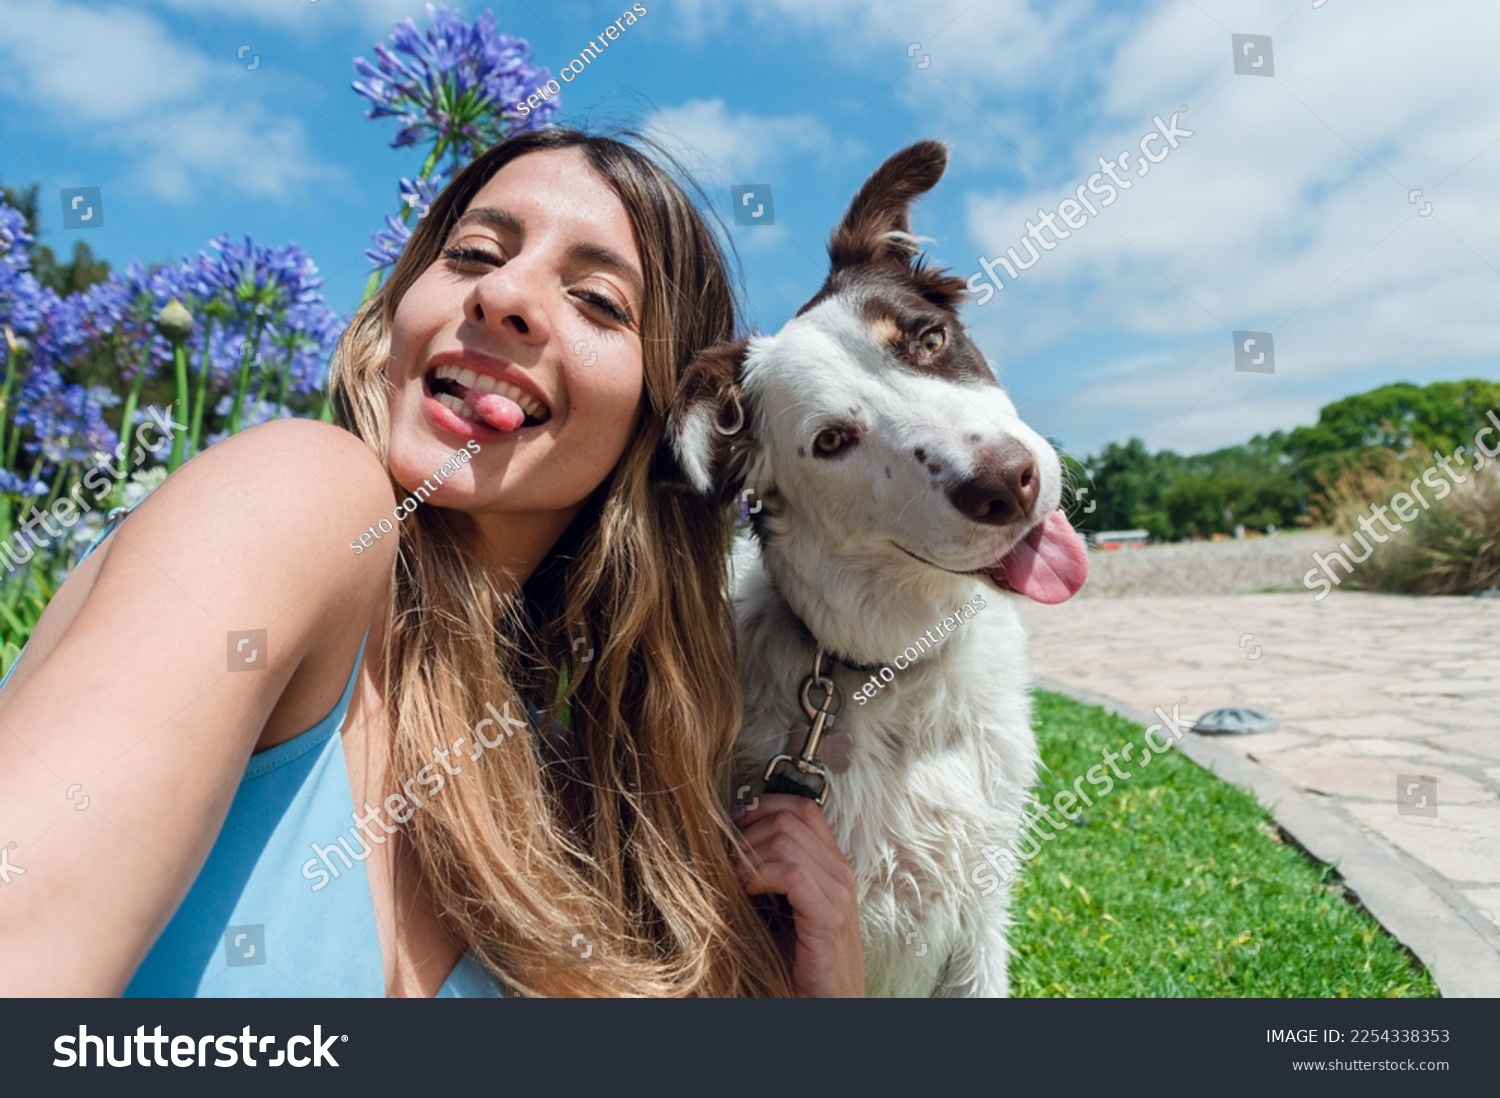 Selfie portrait of young Colombian Latina woman, with her border collie dog, in the park sticking out her tongue and looking at the camera, with the sky and trees in the background, phone perspective. #2254338353